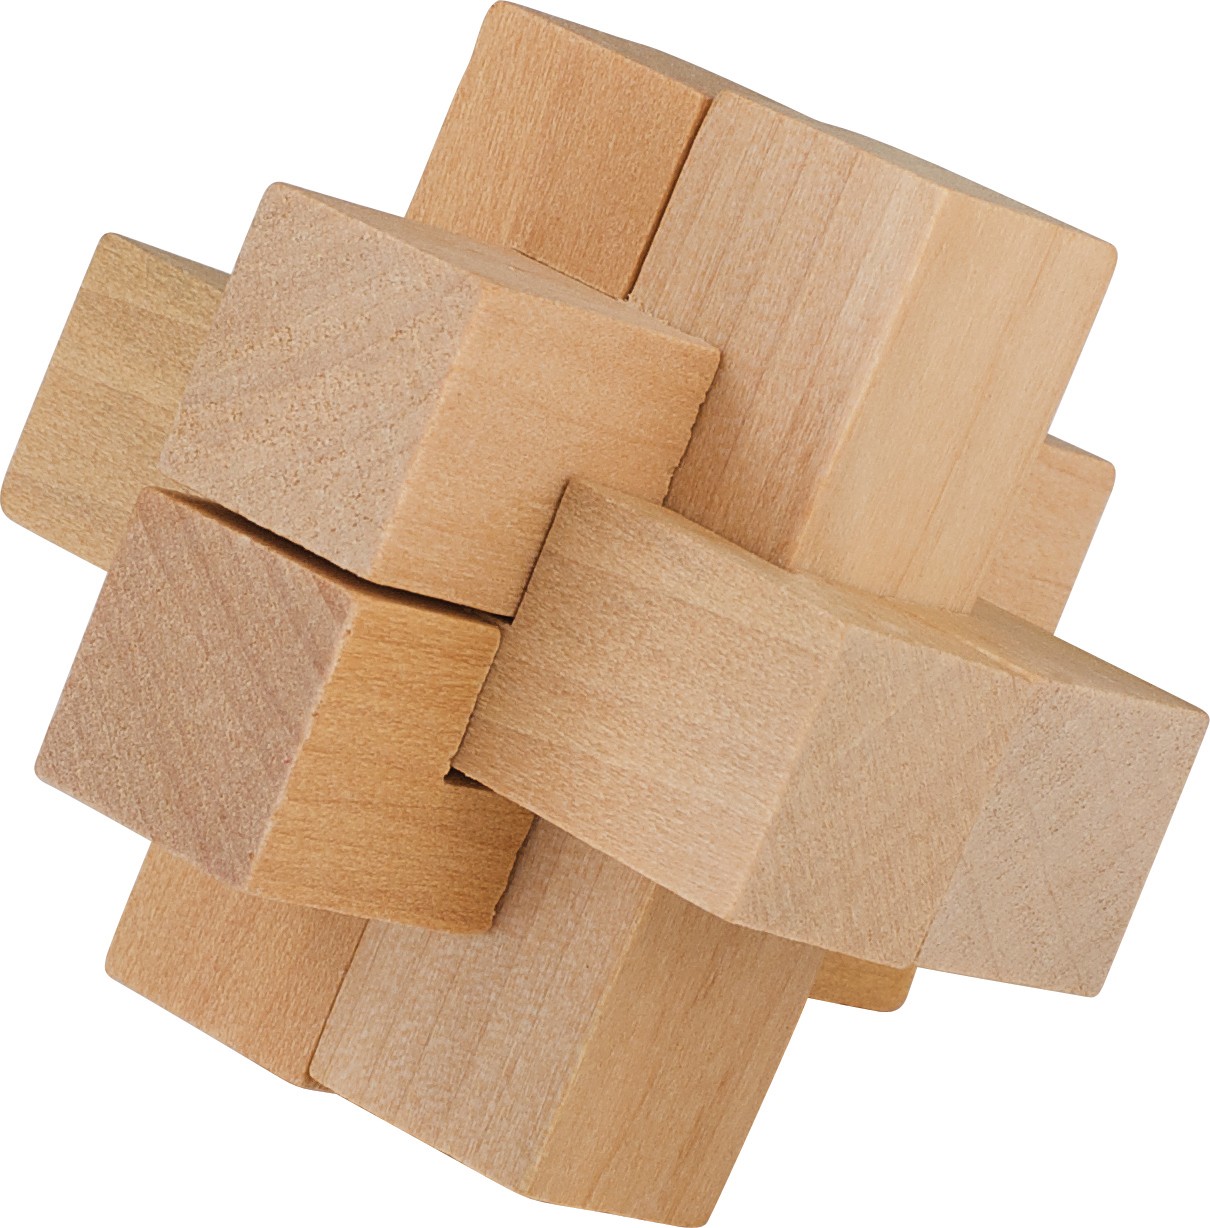 Natural wooden cross puzzles toy